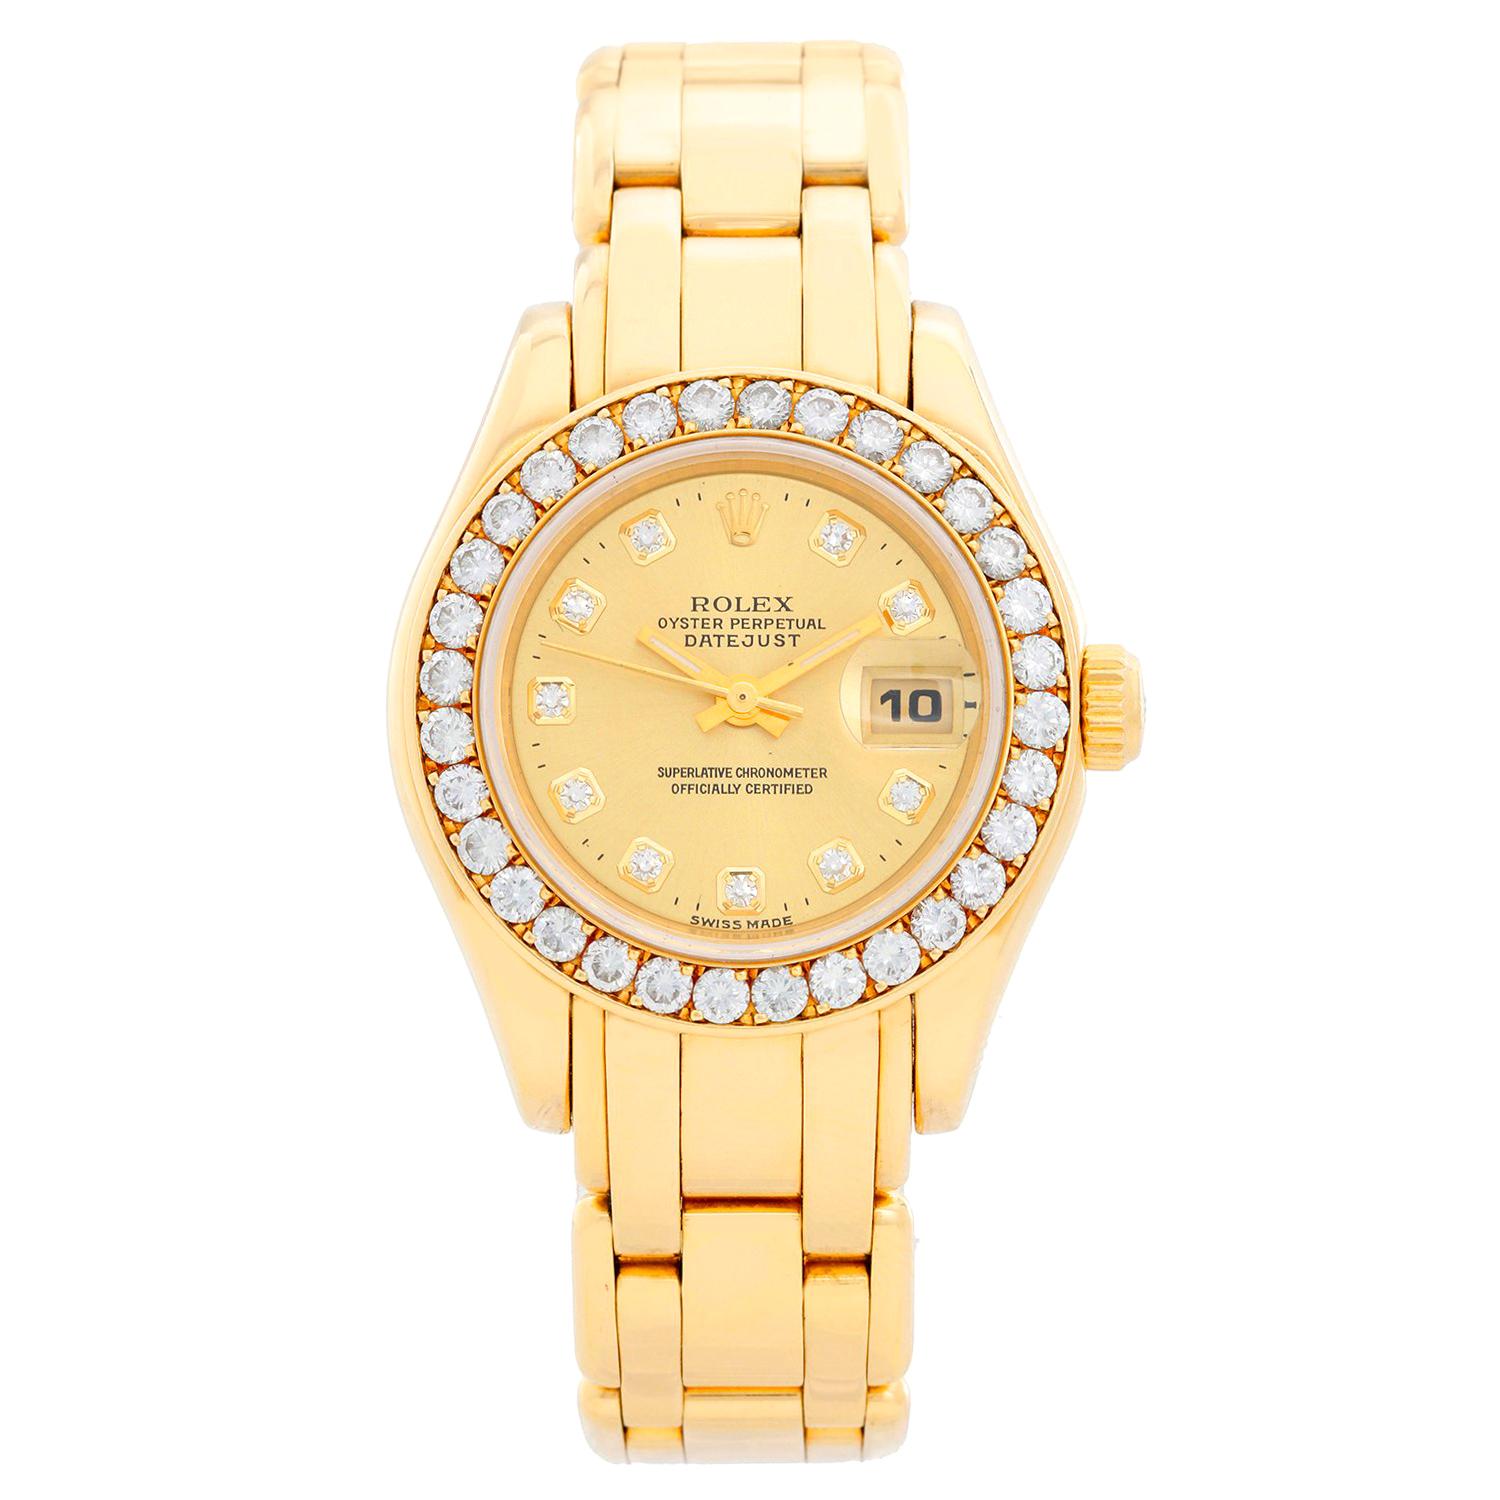 Rolex Ladies Masterpiece/Pearlmaster Gold Diamond Watch 69298 - Automatic winding, 31 jewels, Quickset, sapphire crystal. 18k yellow gold case with factory diamond bezel (29mm diameter). Factory Rolex Champagne diamond dial. 18k yellow gold